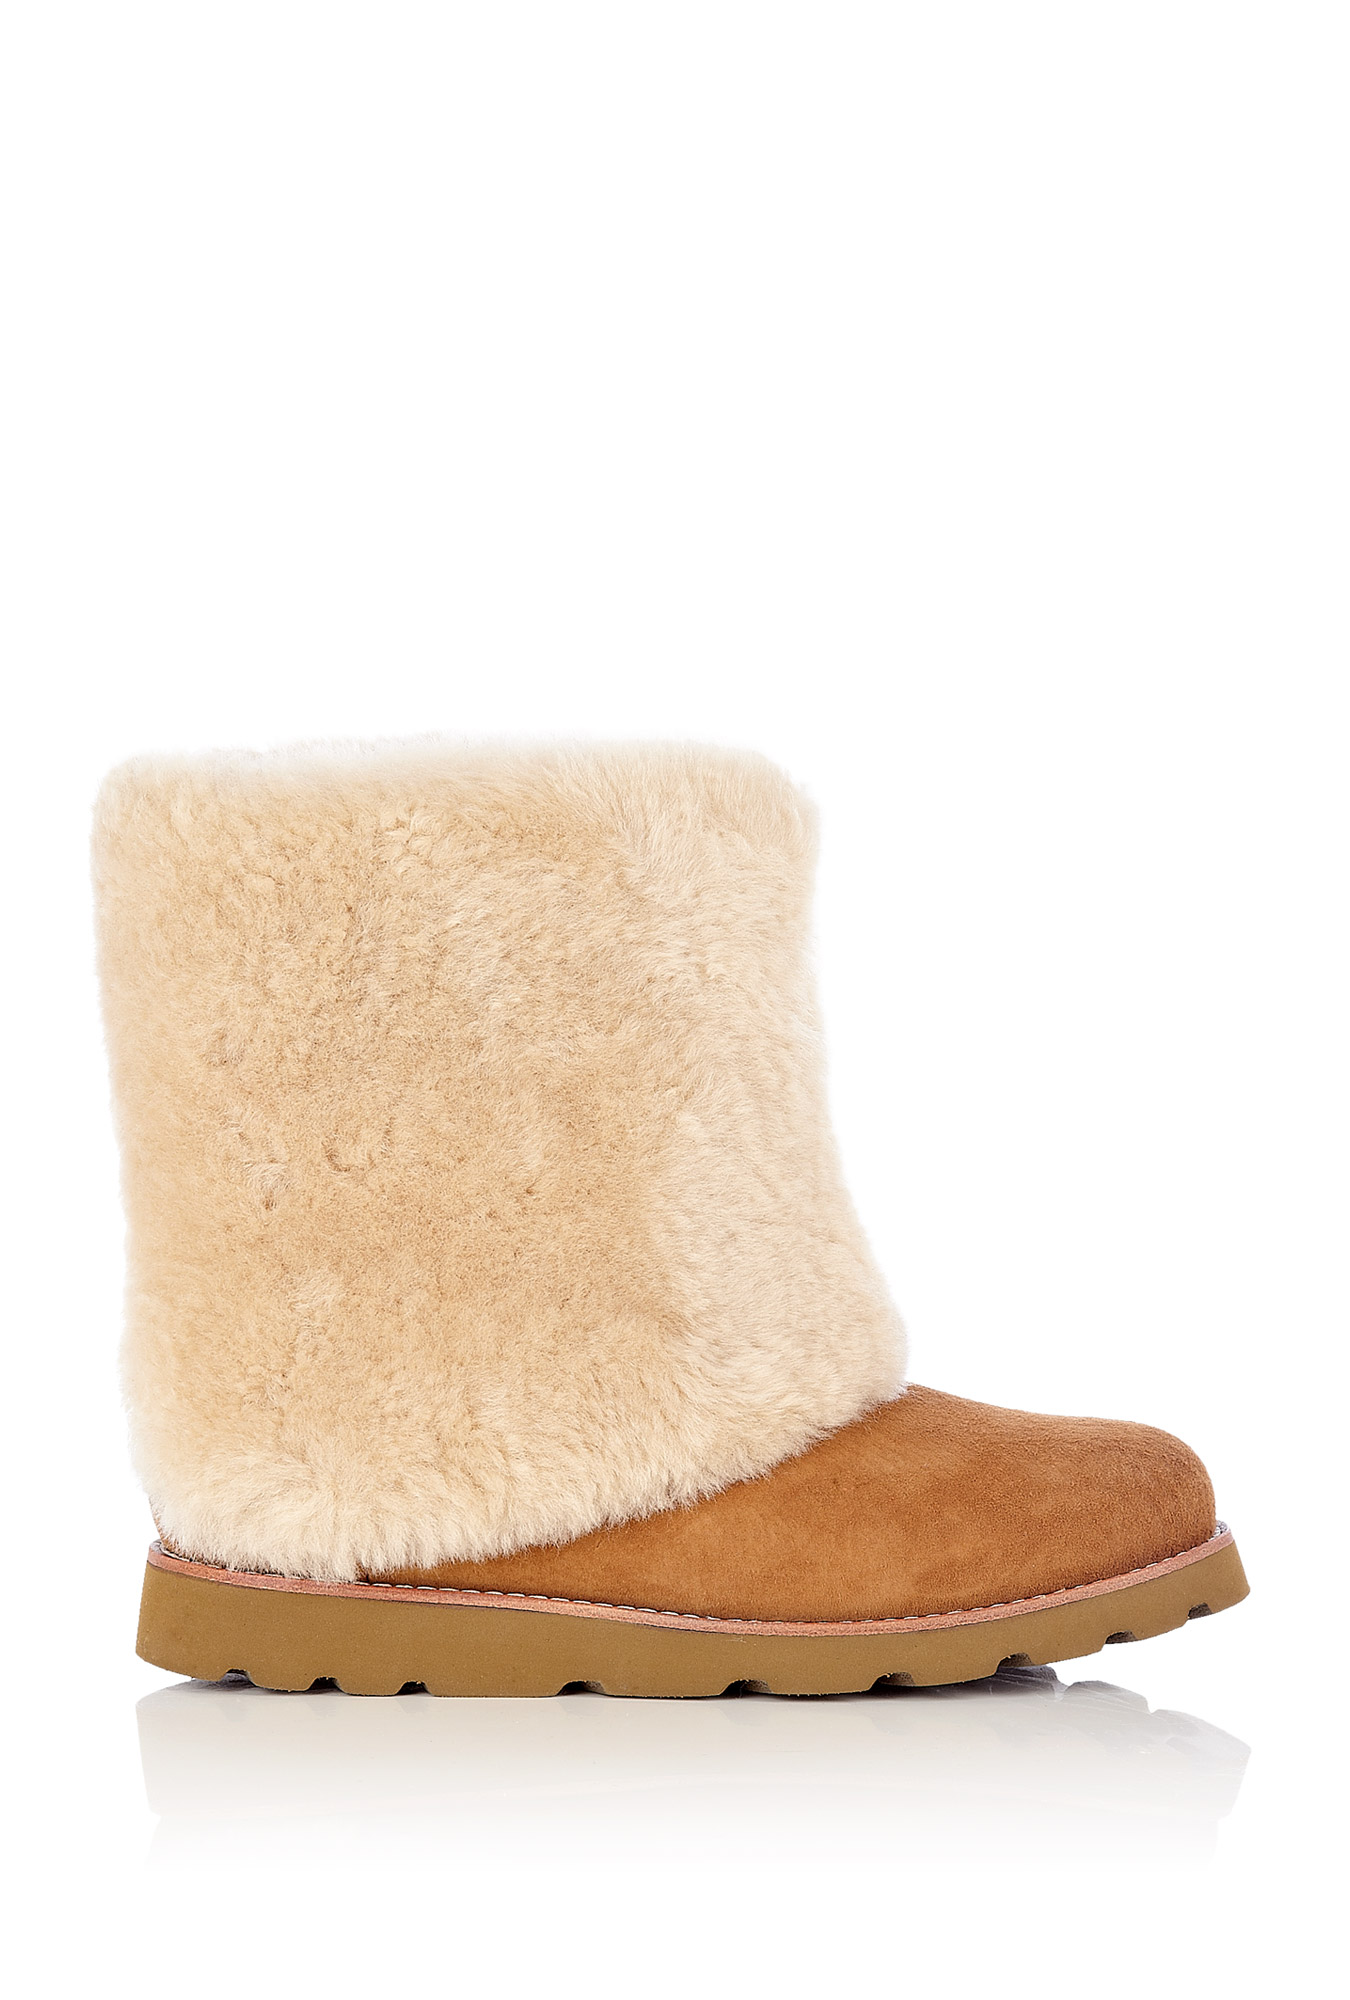 Ugg Chestnut Maylin Shearling Cuffed Ankle Boot in Brown (chestnut) | Lyst